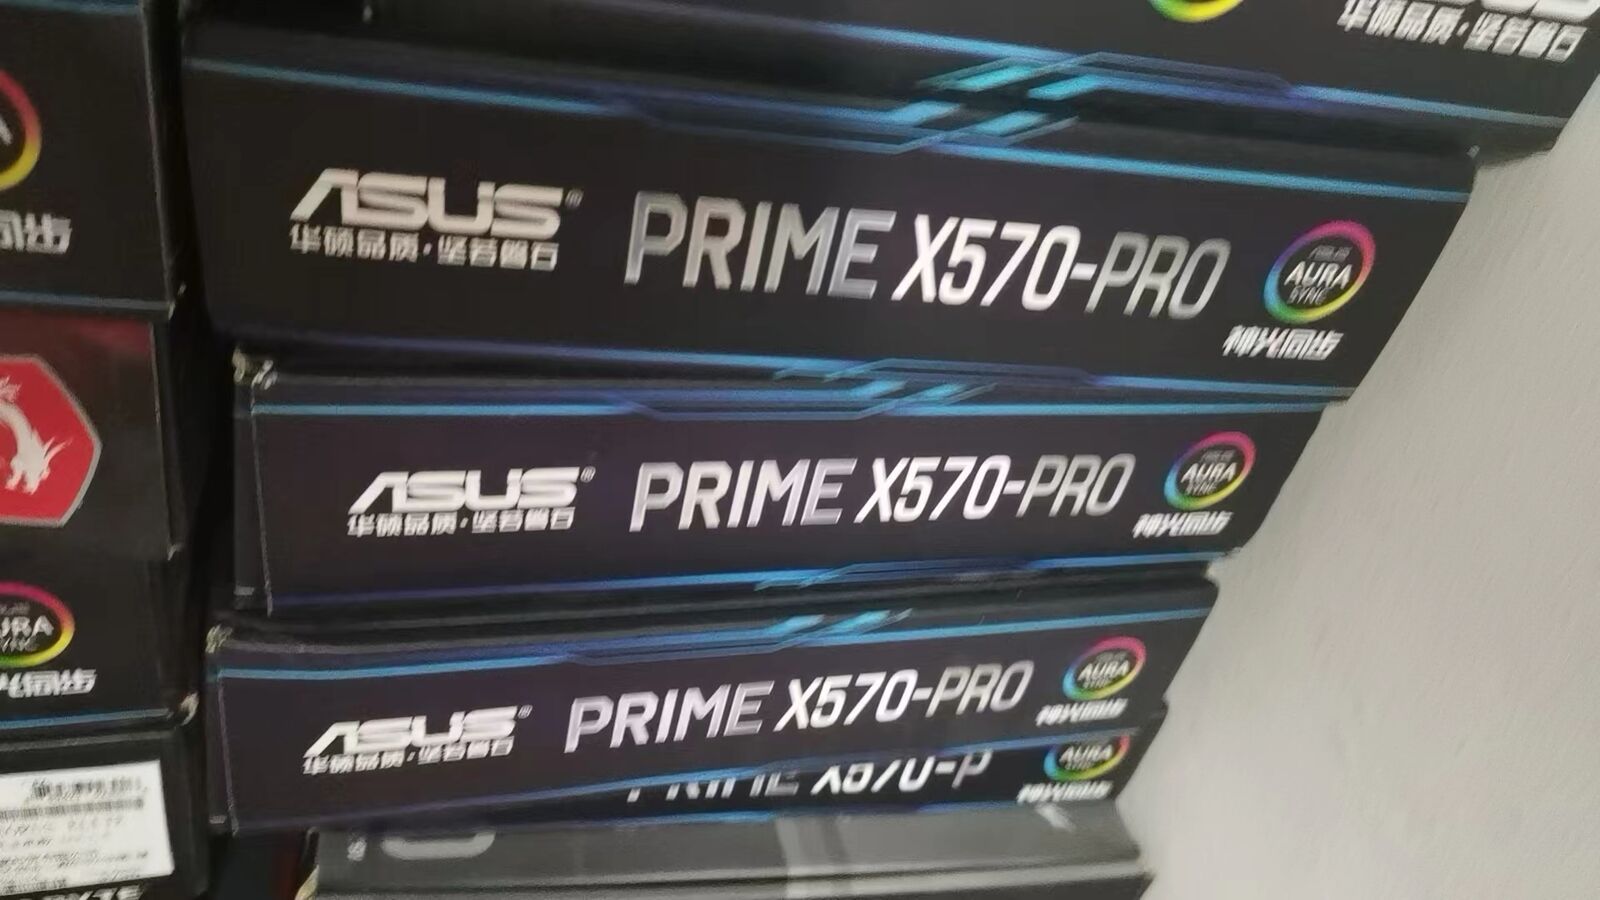 ASUS Prime X570-Pro Motherboard AM4 PCIe Gen4 Dual M.2 HDMI Support MAD R7 5800X